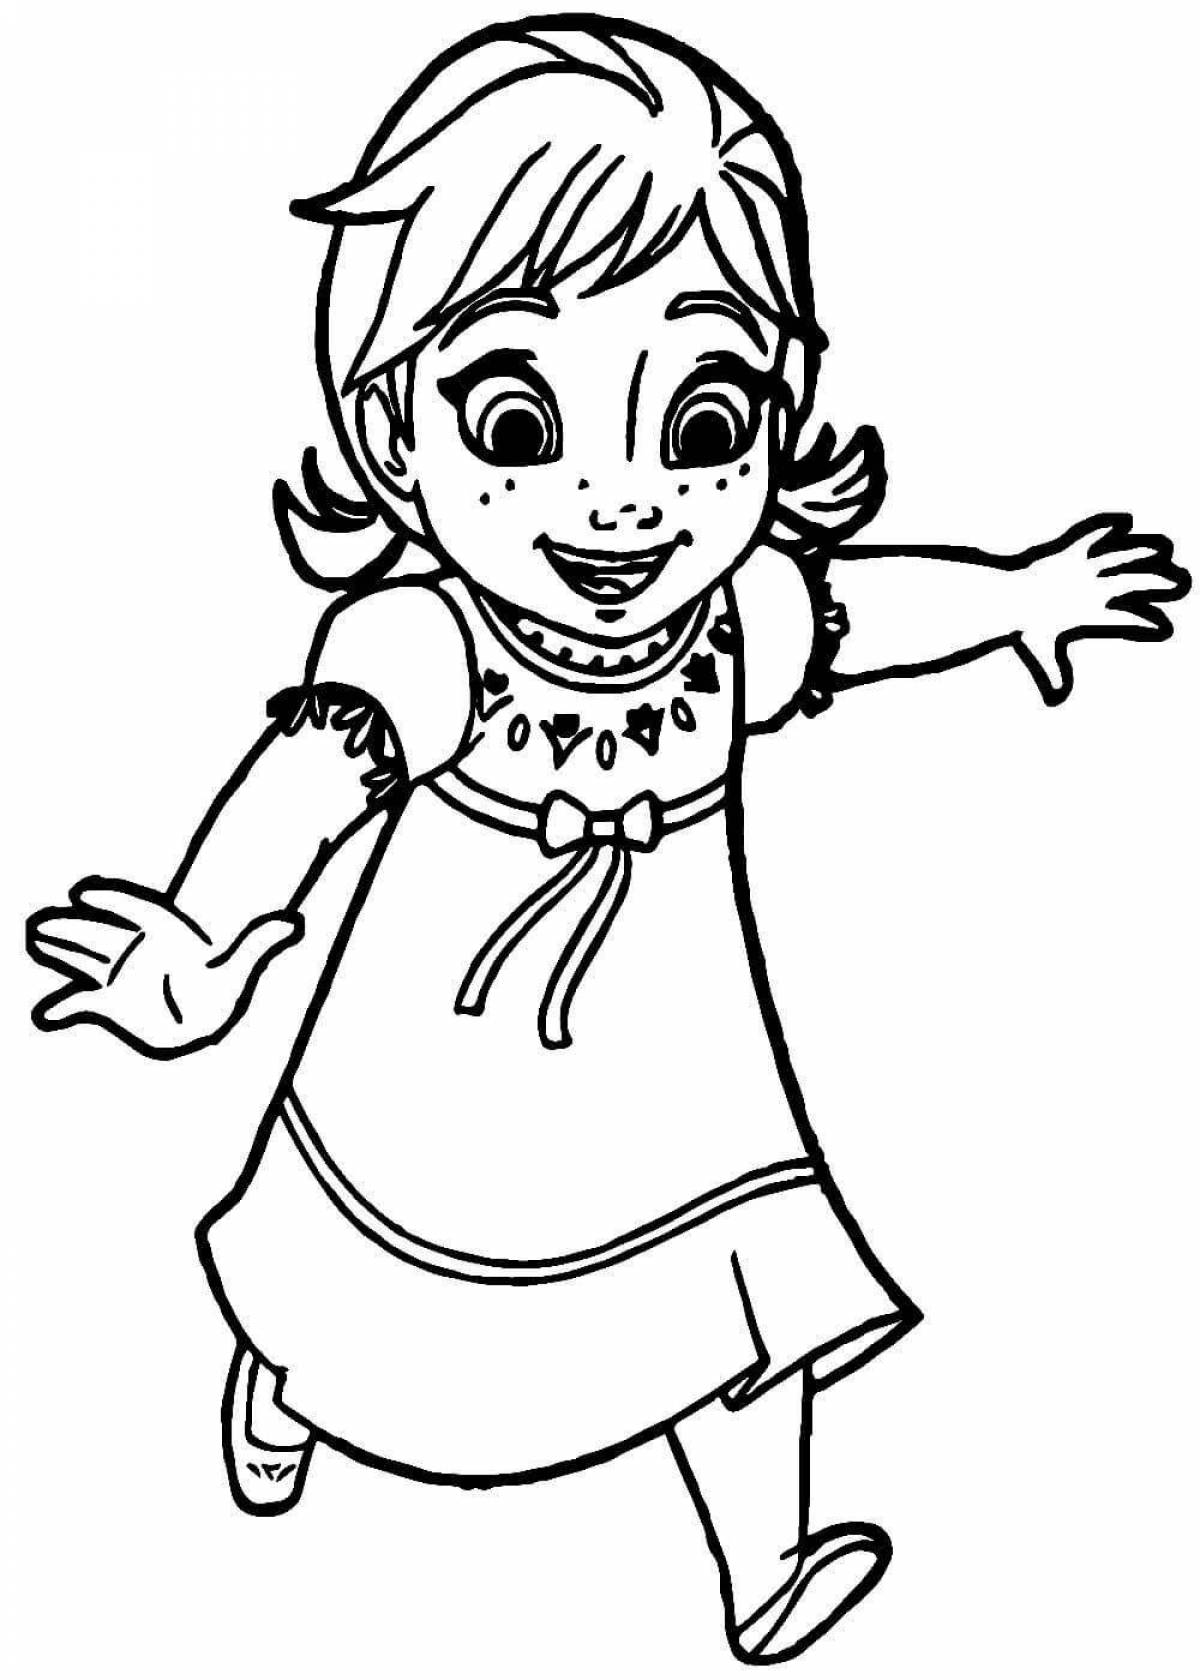 Anya's colorful coloring page